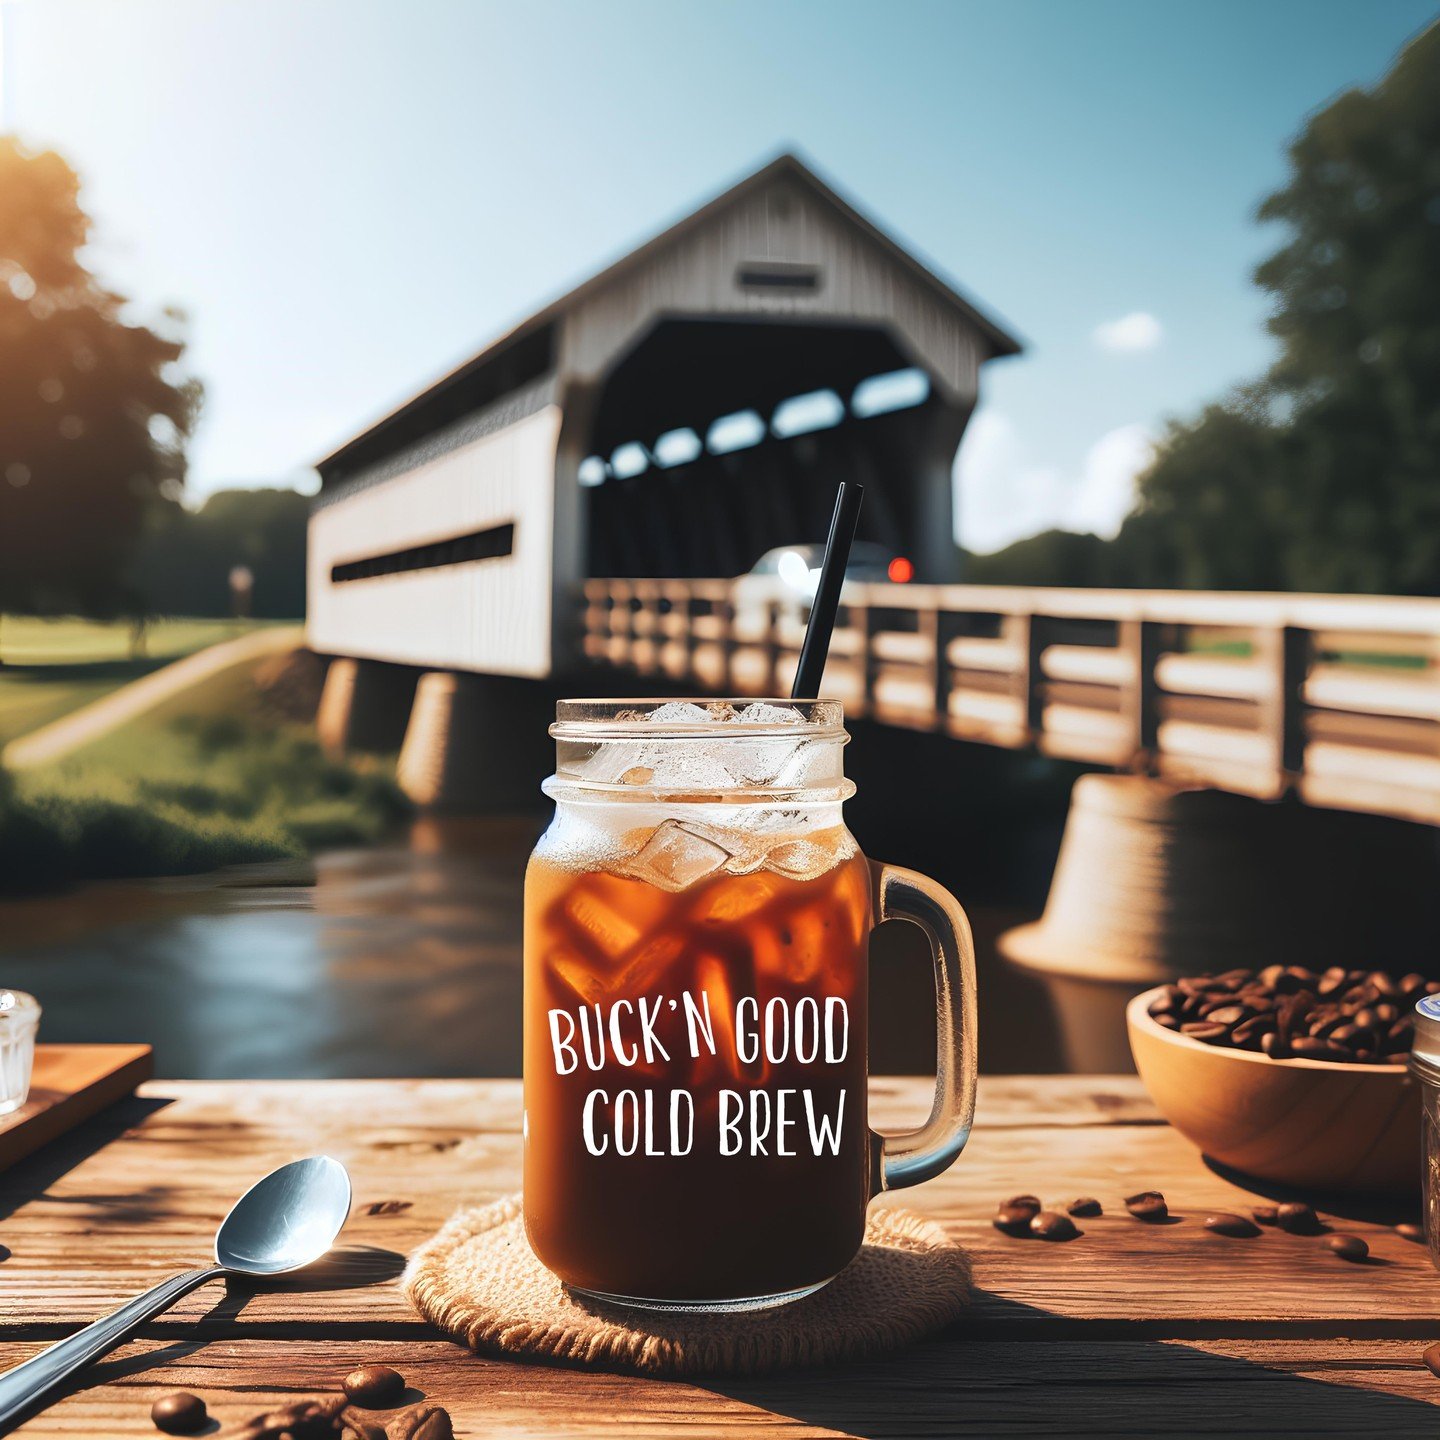 Our Buck'N good cold brew is live on our website! Each bottle makes 192oz of premium cold brew coffee. Grab a two pack today!